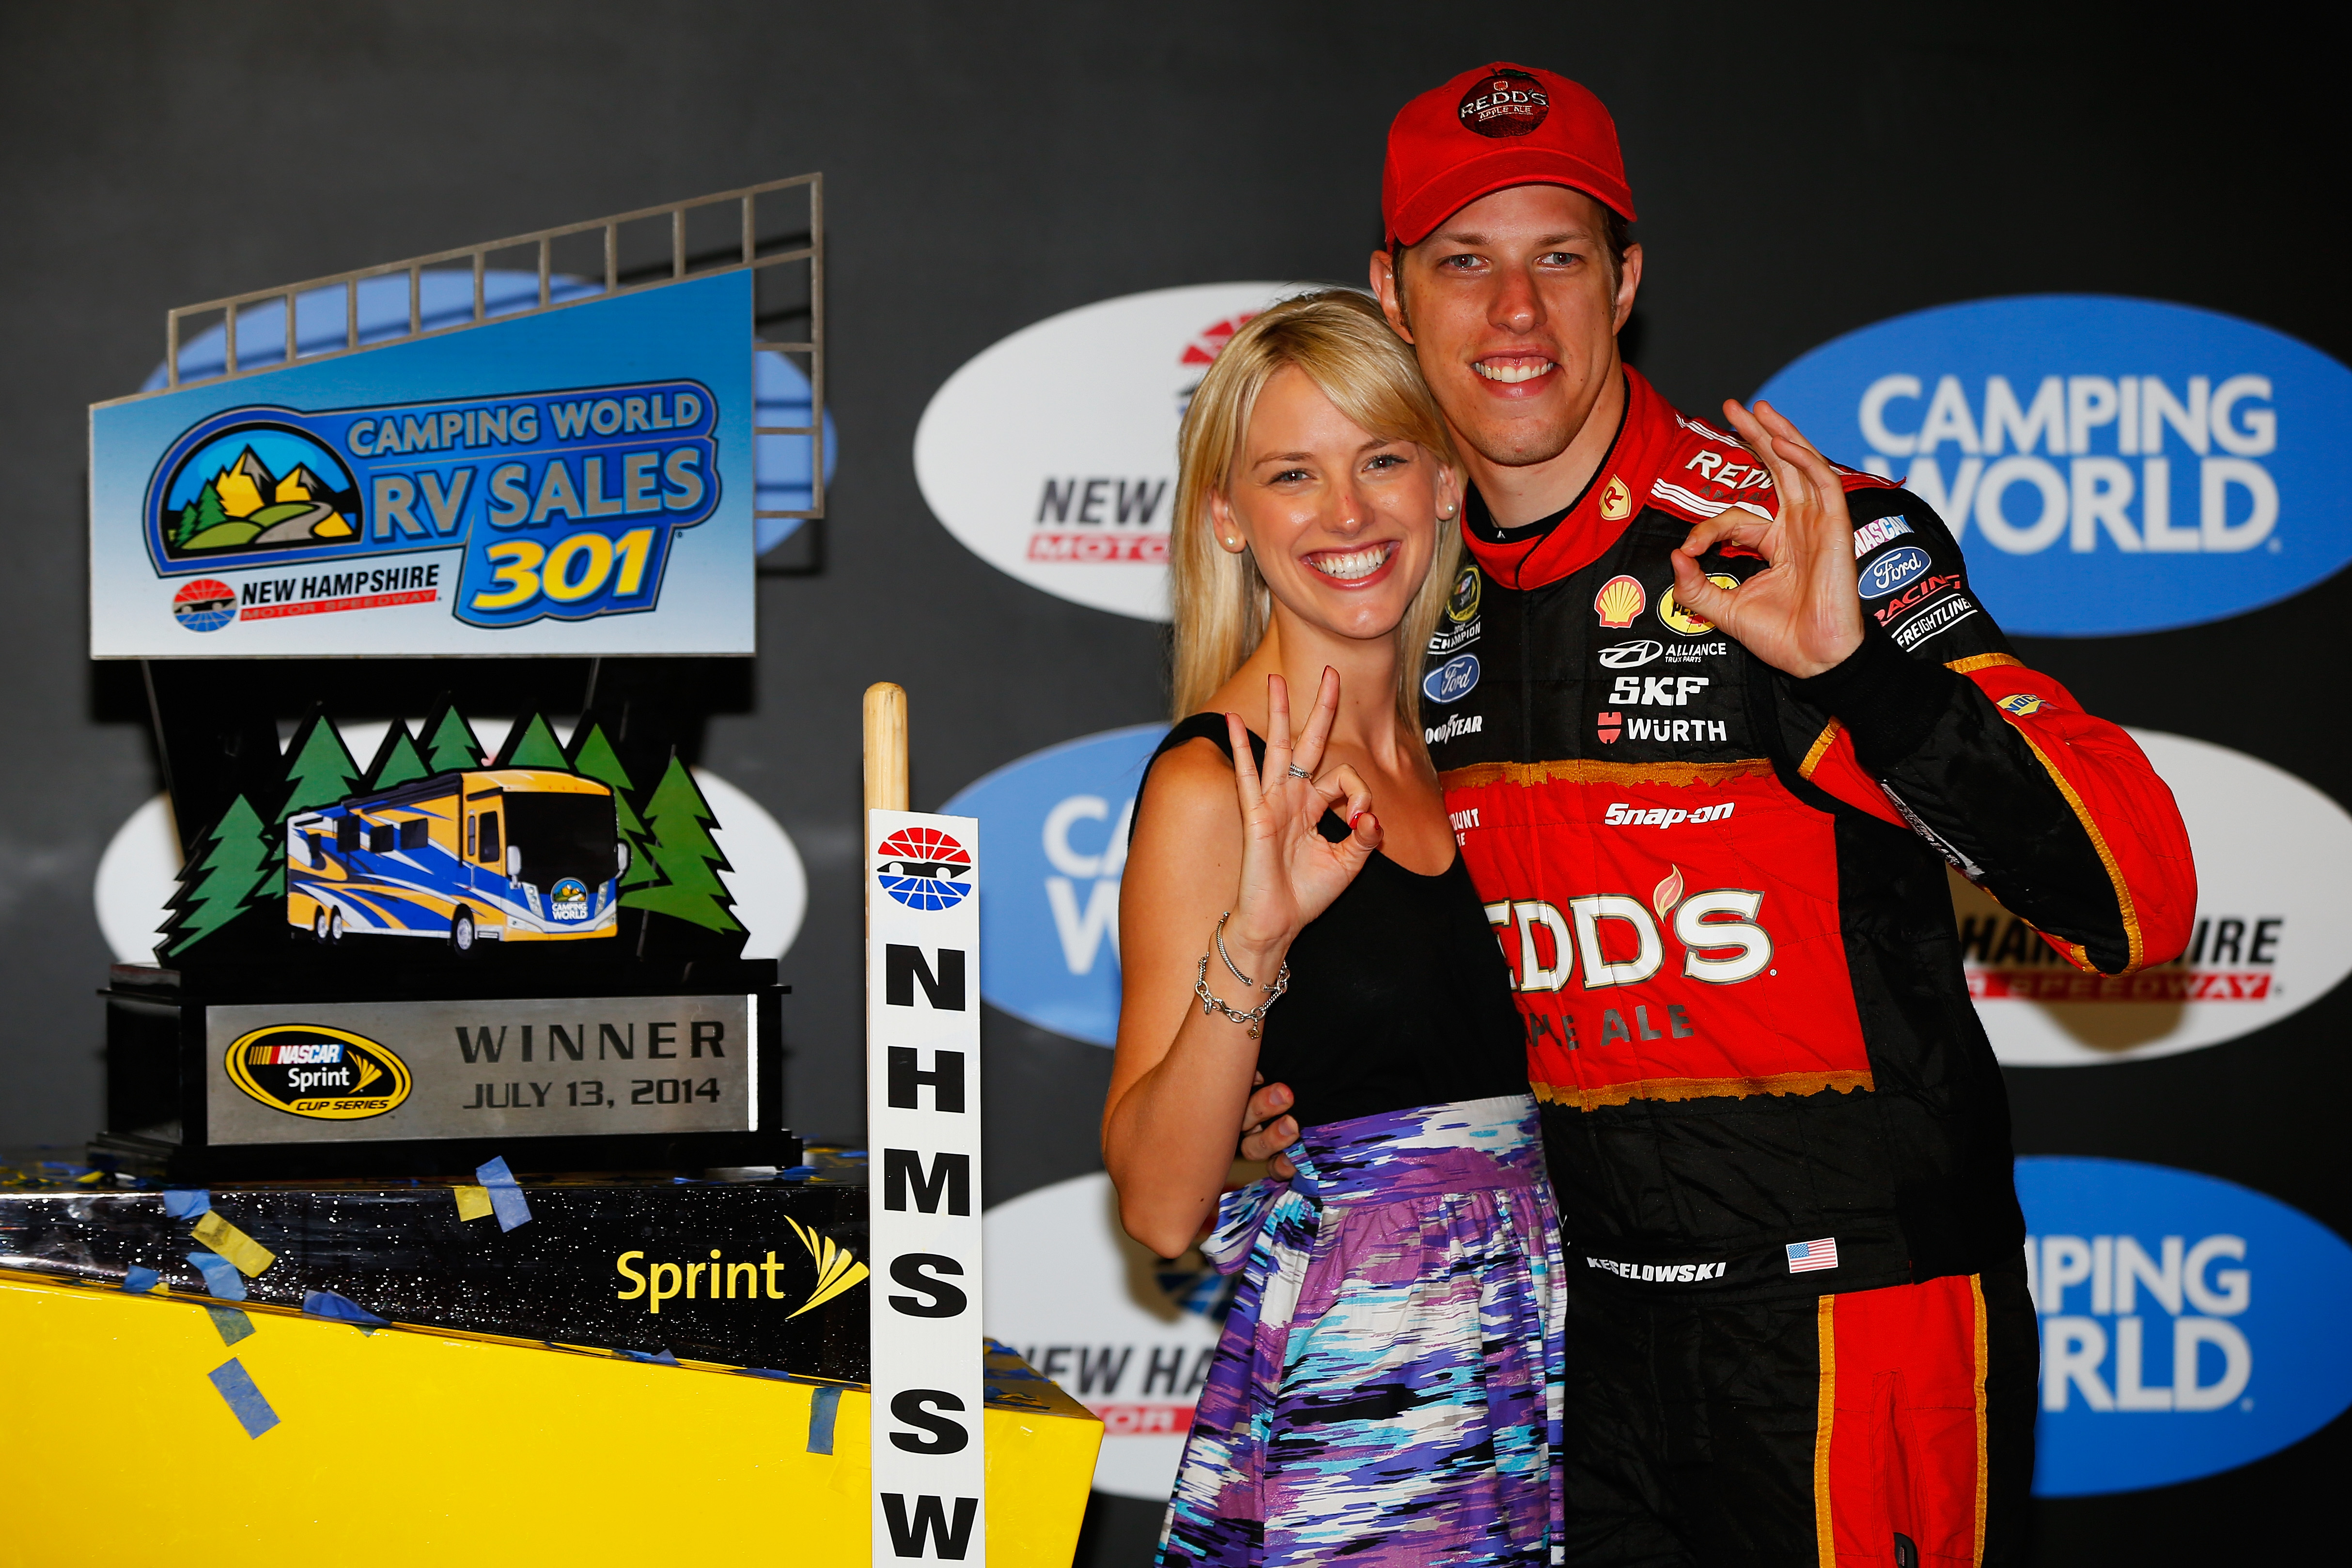 LOUDON, NH - JULY 13:  Brad Keselowski, driver of the #2 Redds Ford, poses with girlfriend Paige White and the Winner's Trophy after winning the NASCAR Sprint Cup Series Camping World RV Sales 301 at New Hampshire Motor Speedway on July 13, 2014 in Loudon, New Hampshire.  (Photo by Matt Sullivan/NASCAR via Getty Images)